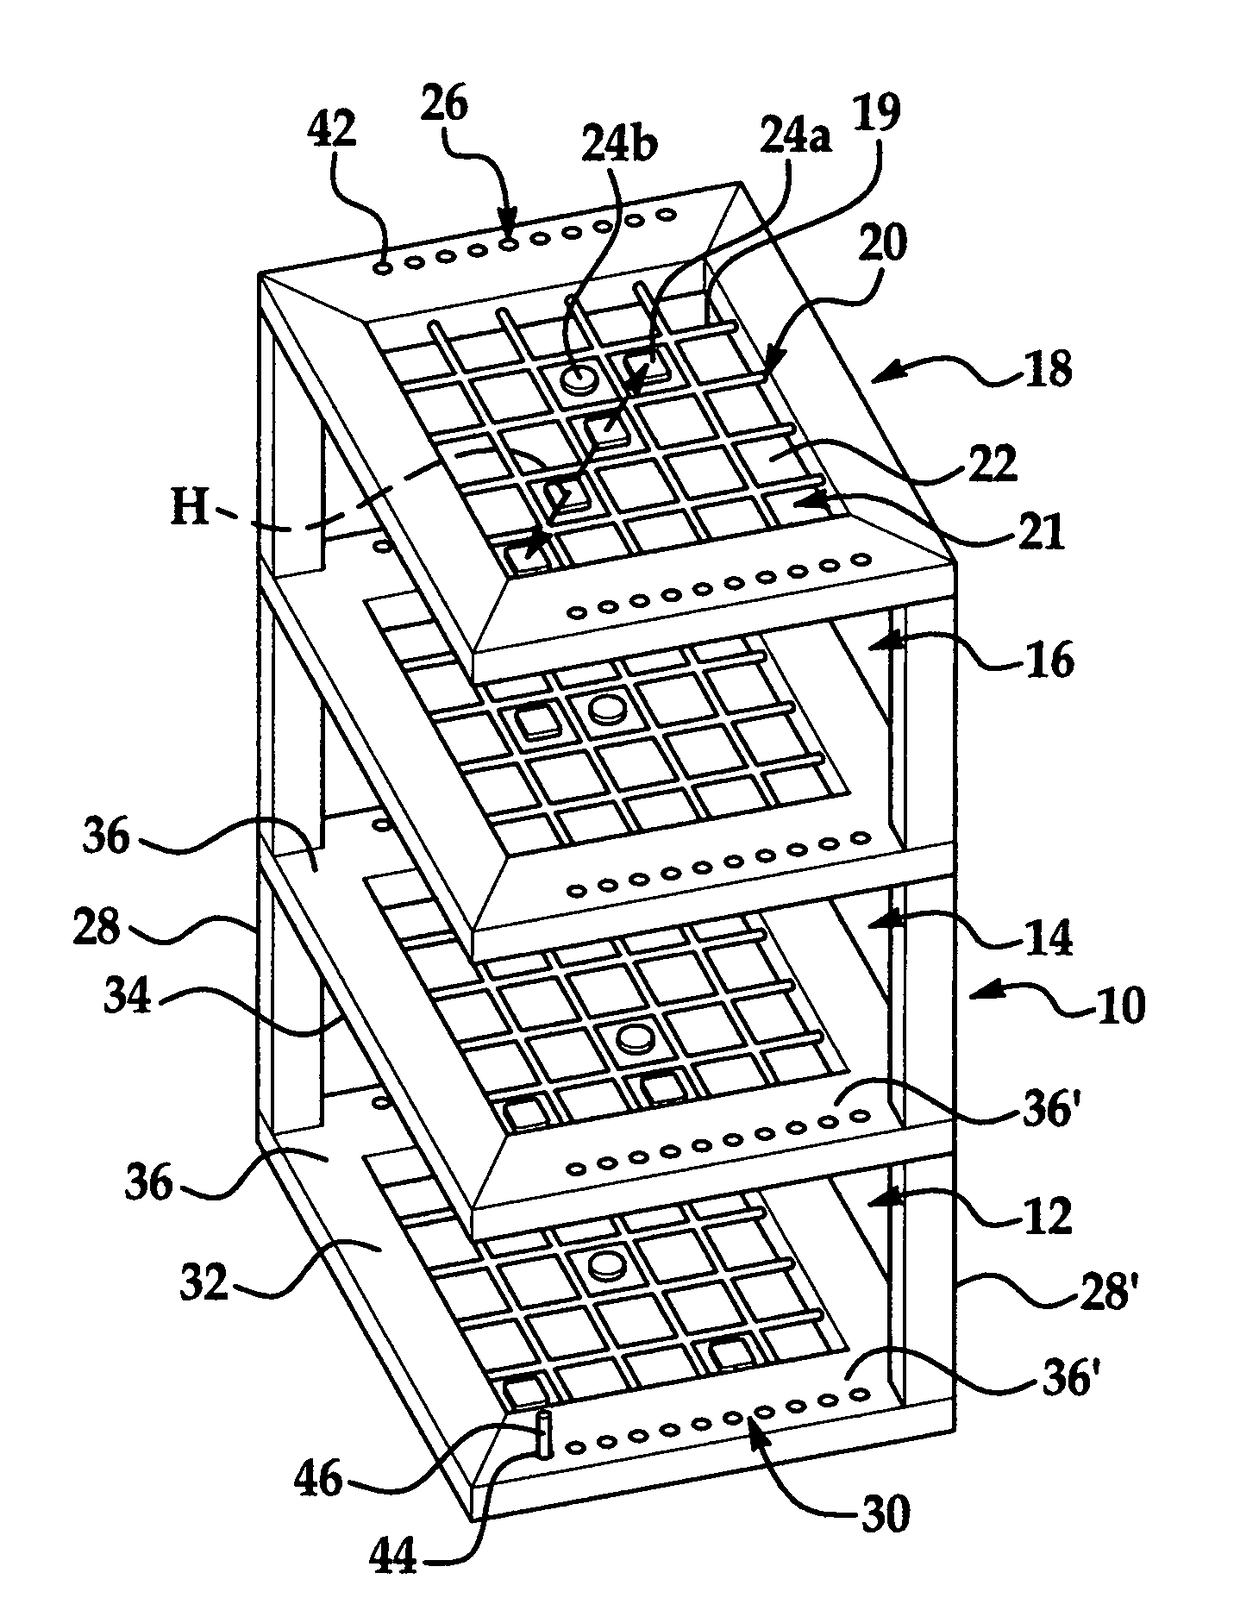 Three-dimensional alignment board game and method of playing same